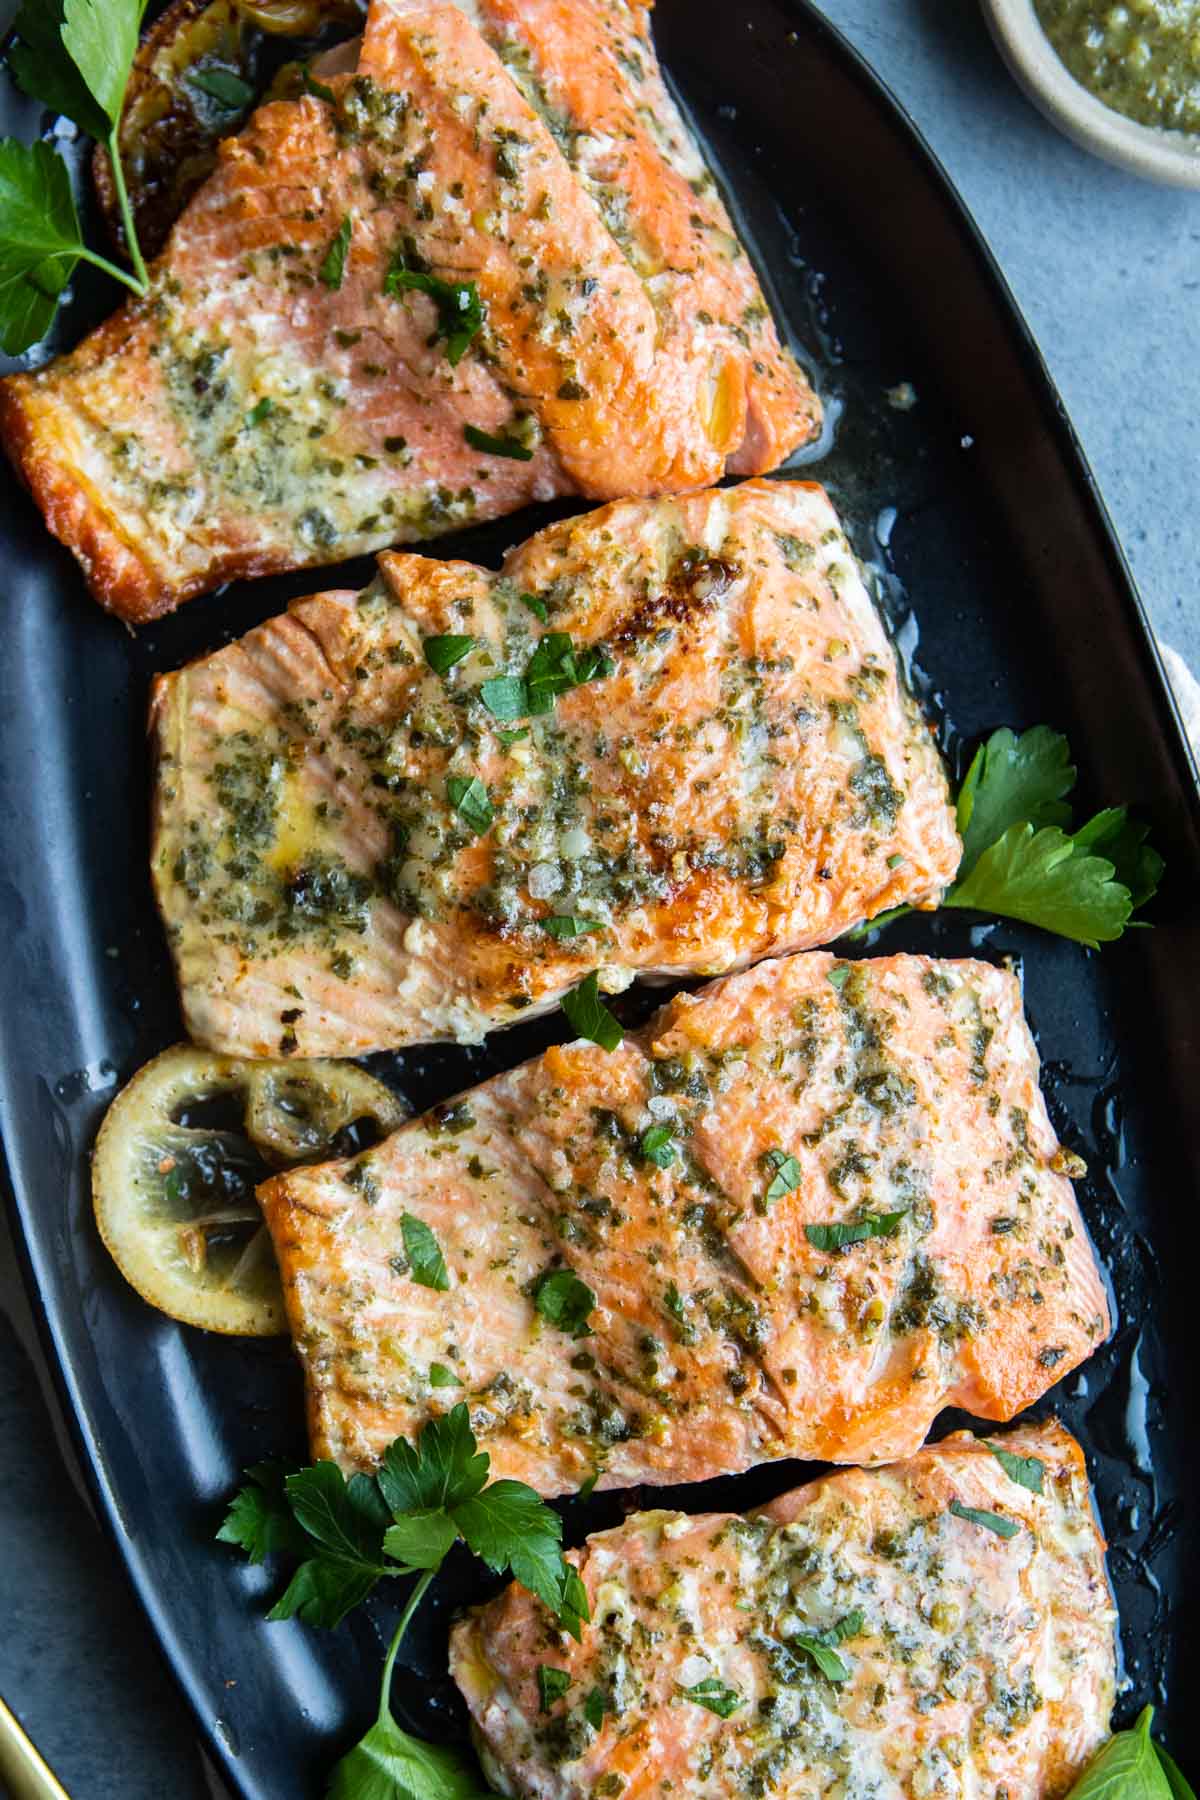 Pesto butter salmon served on an oval serving platter with lemon slices and parsley garnishes.